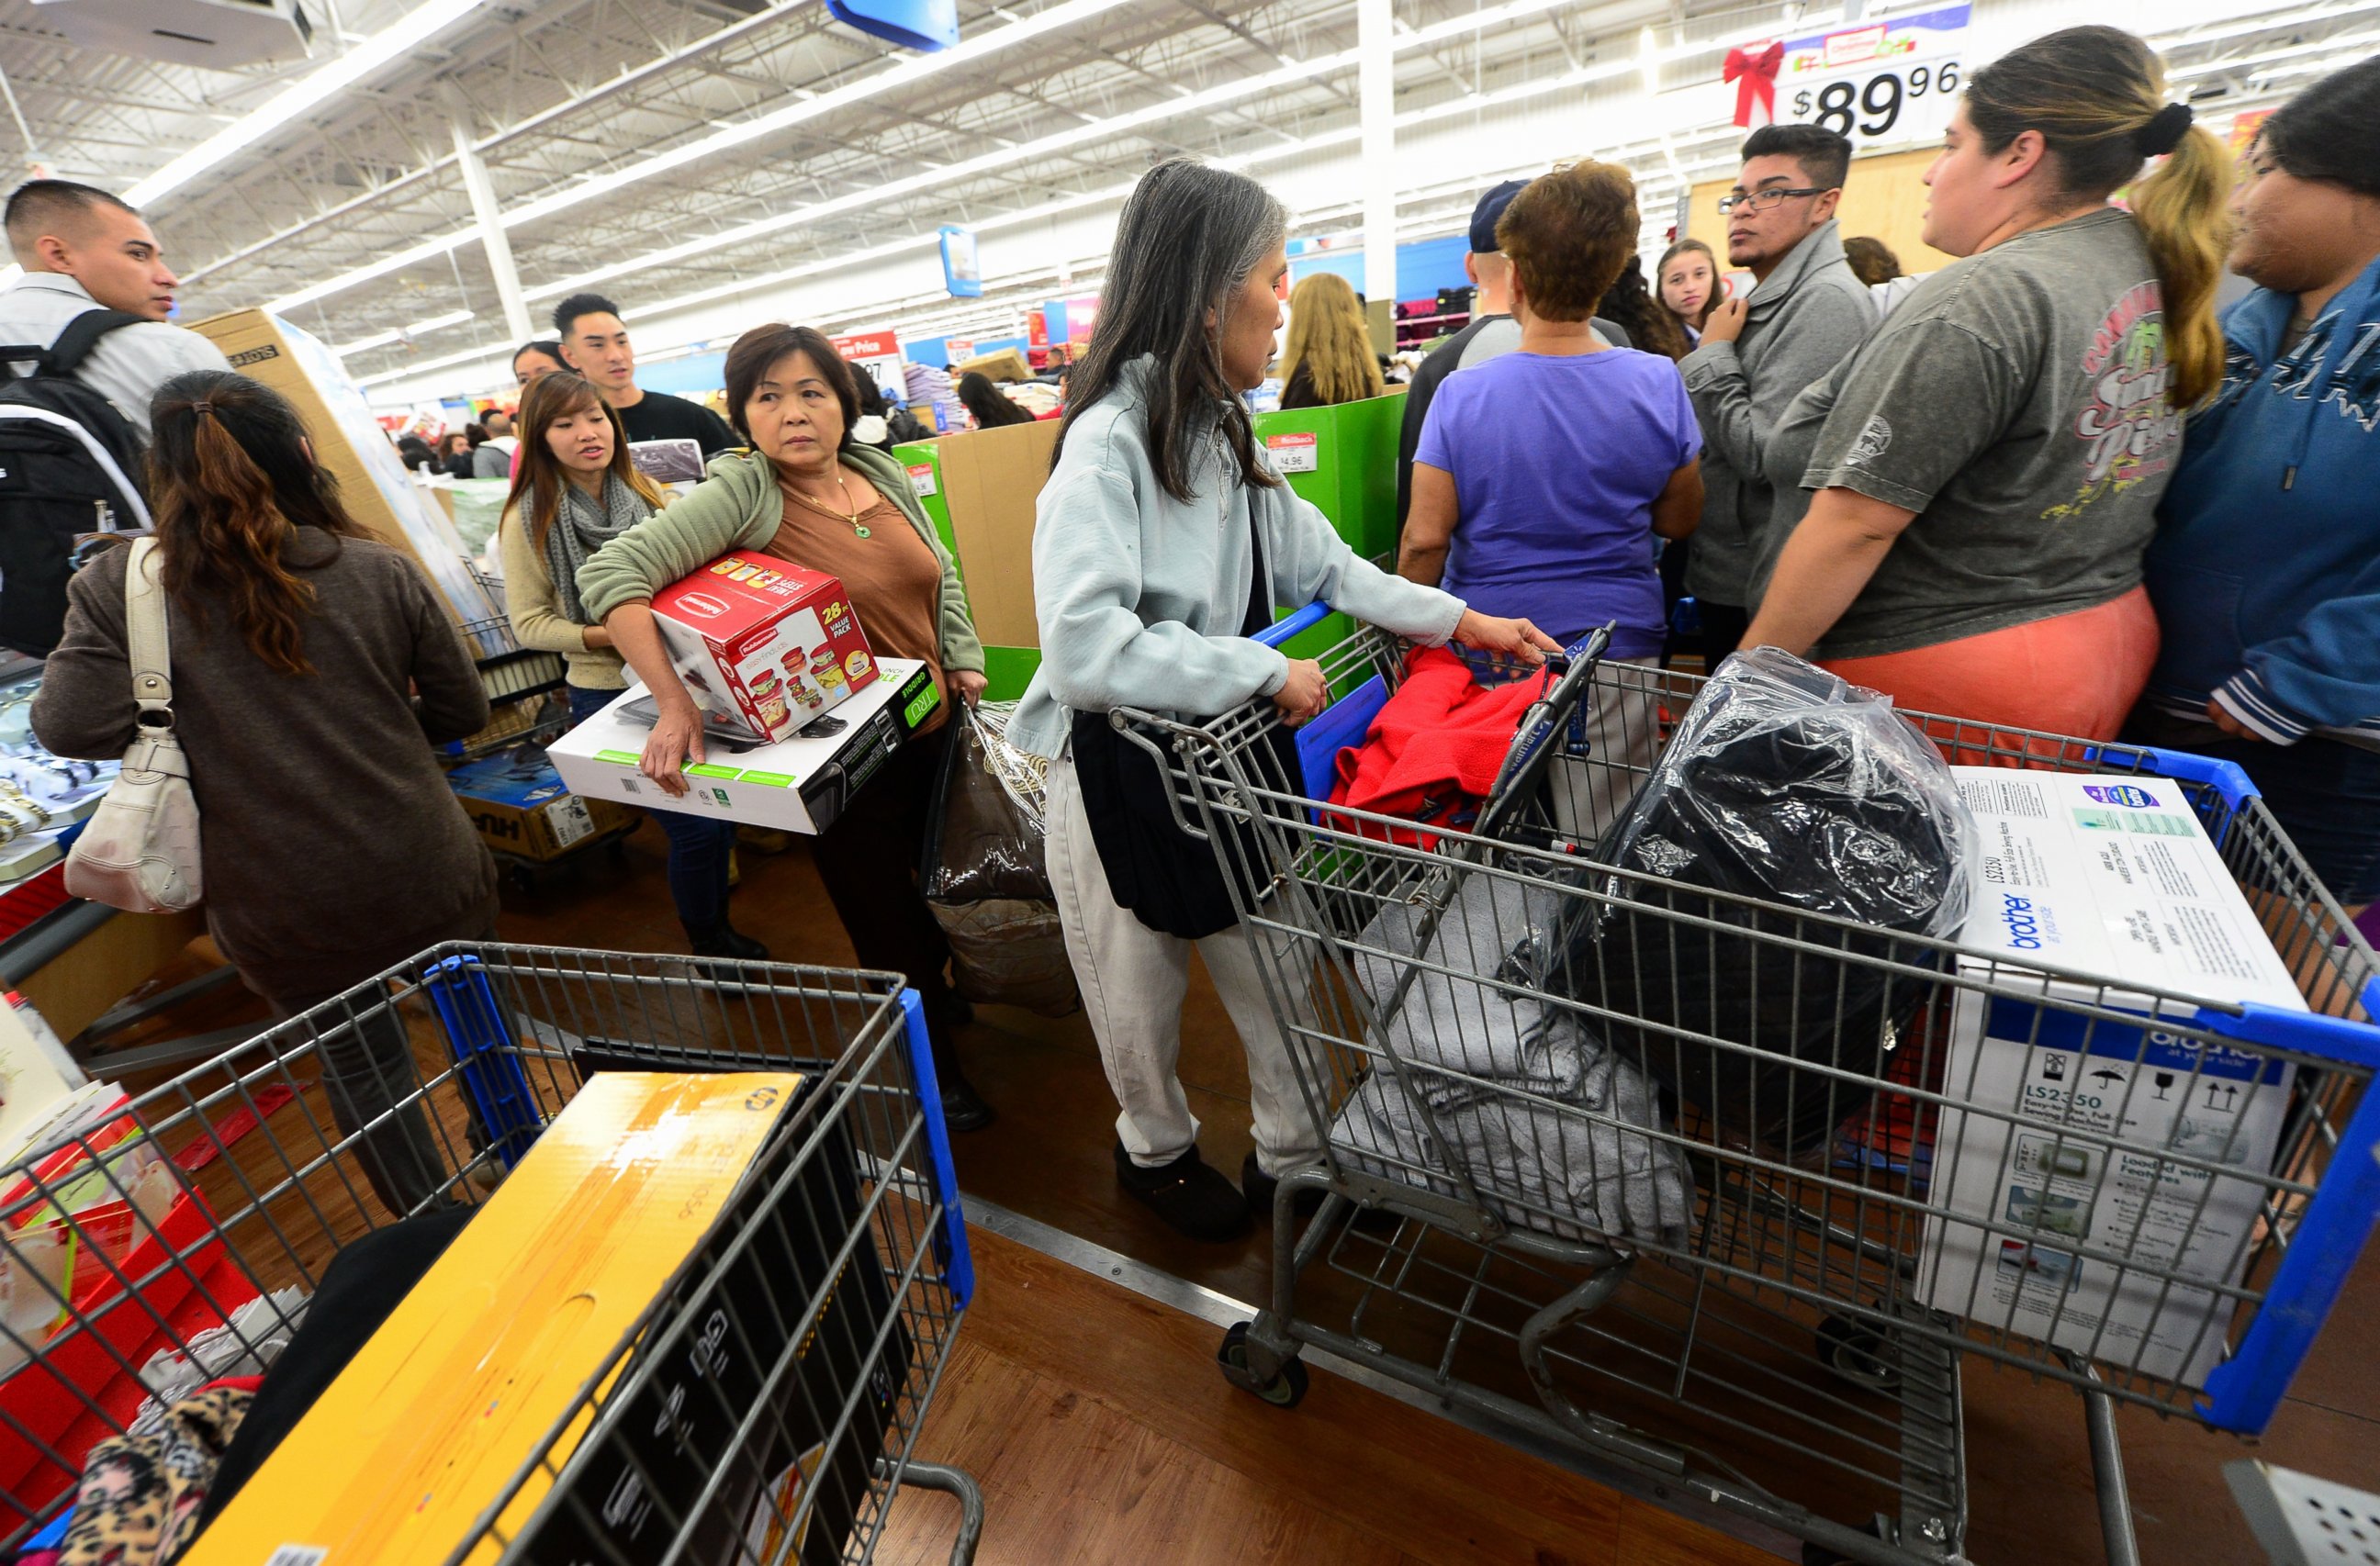 PHOTO: People get an early start on Black Friday shopping deals at a Walmart Superstore on Nov. 22, 2012 in Rosemead, Calif.